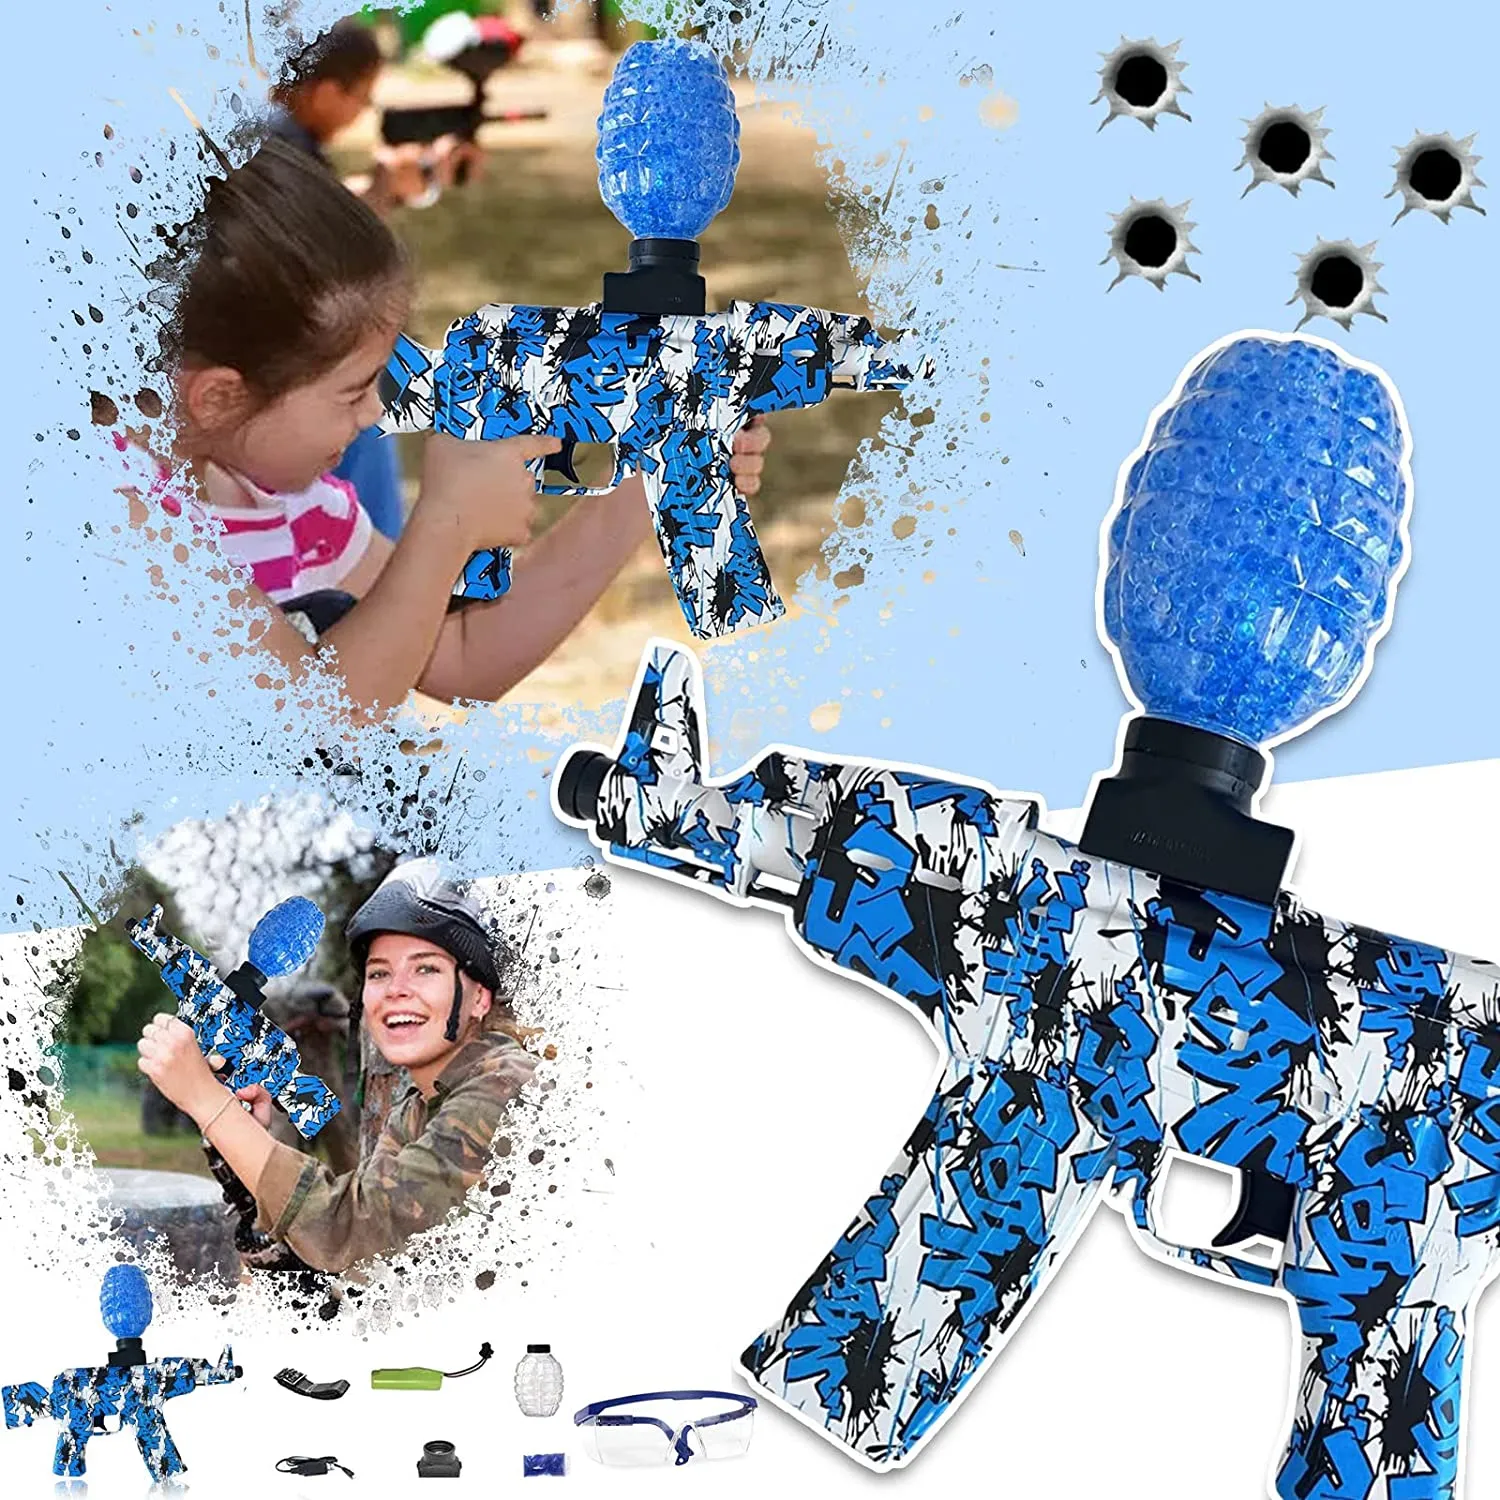 AK47 Gel Electric Gel Blaster Friendly Plaintly Paintball Airsoft Orbeez Gun Beads Automatic Water Beads Shooter for Children